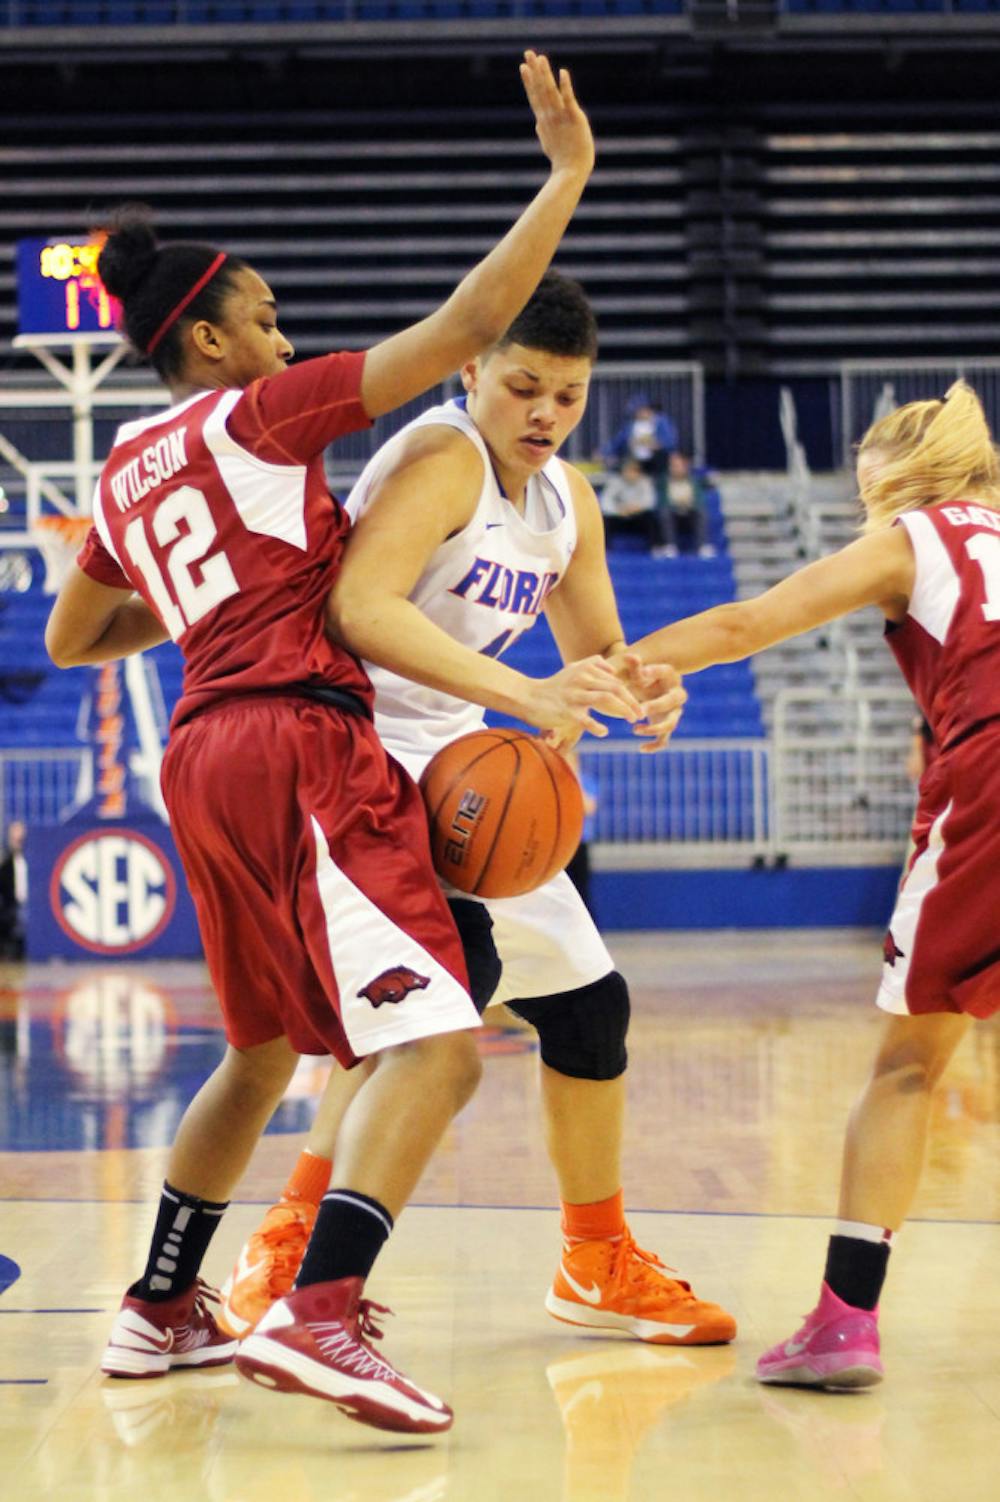 <p class="p1"><span class="s1">Freshman guard Sydney Moss loses her grip on the ball during Florida 69-58 loss to Arkansas on Feb. 28 in the O’Connell Center.</span></p>